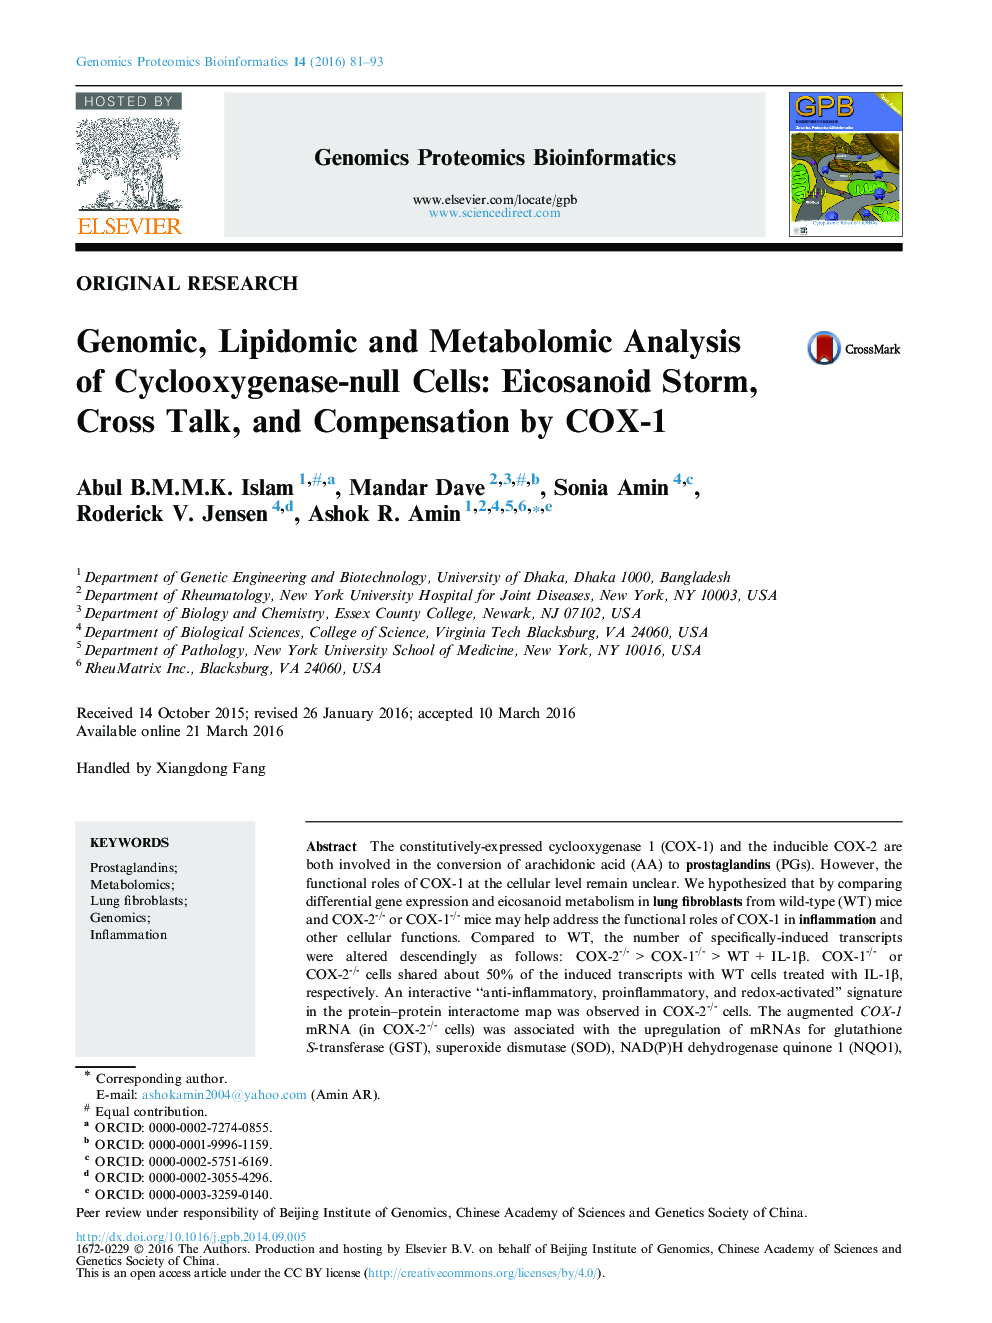 Genomic, Lipidomic and Metabolomic Analysis of Cyclooxygenase-null Cells: Eicosanoid Storm, Cross Talk, and Compensation by COX-1 